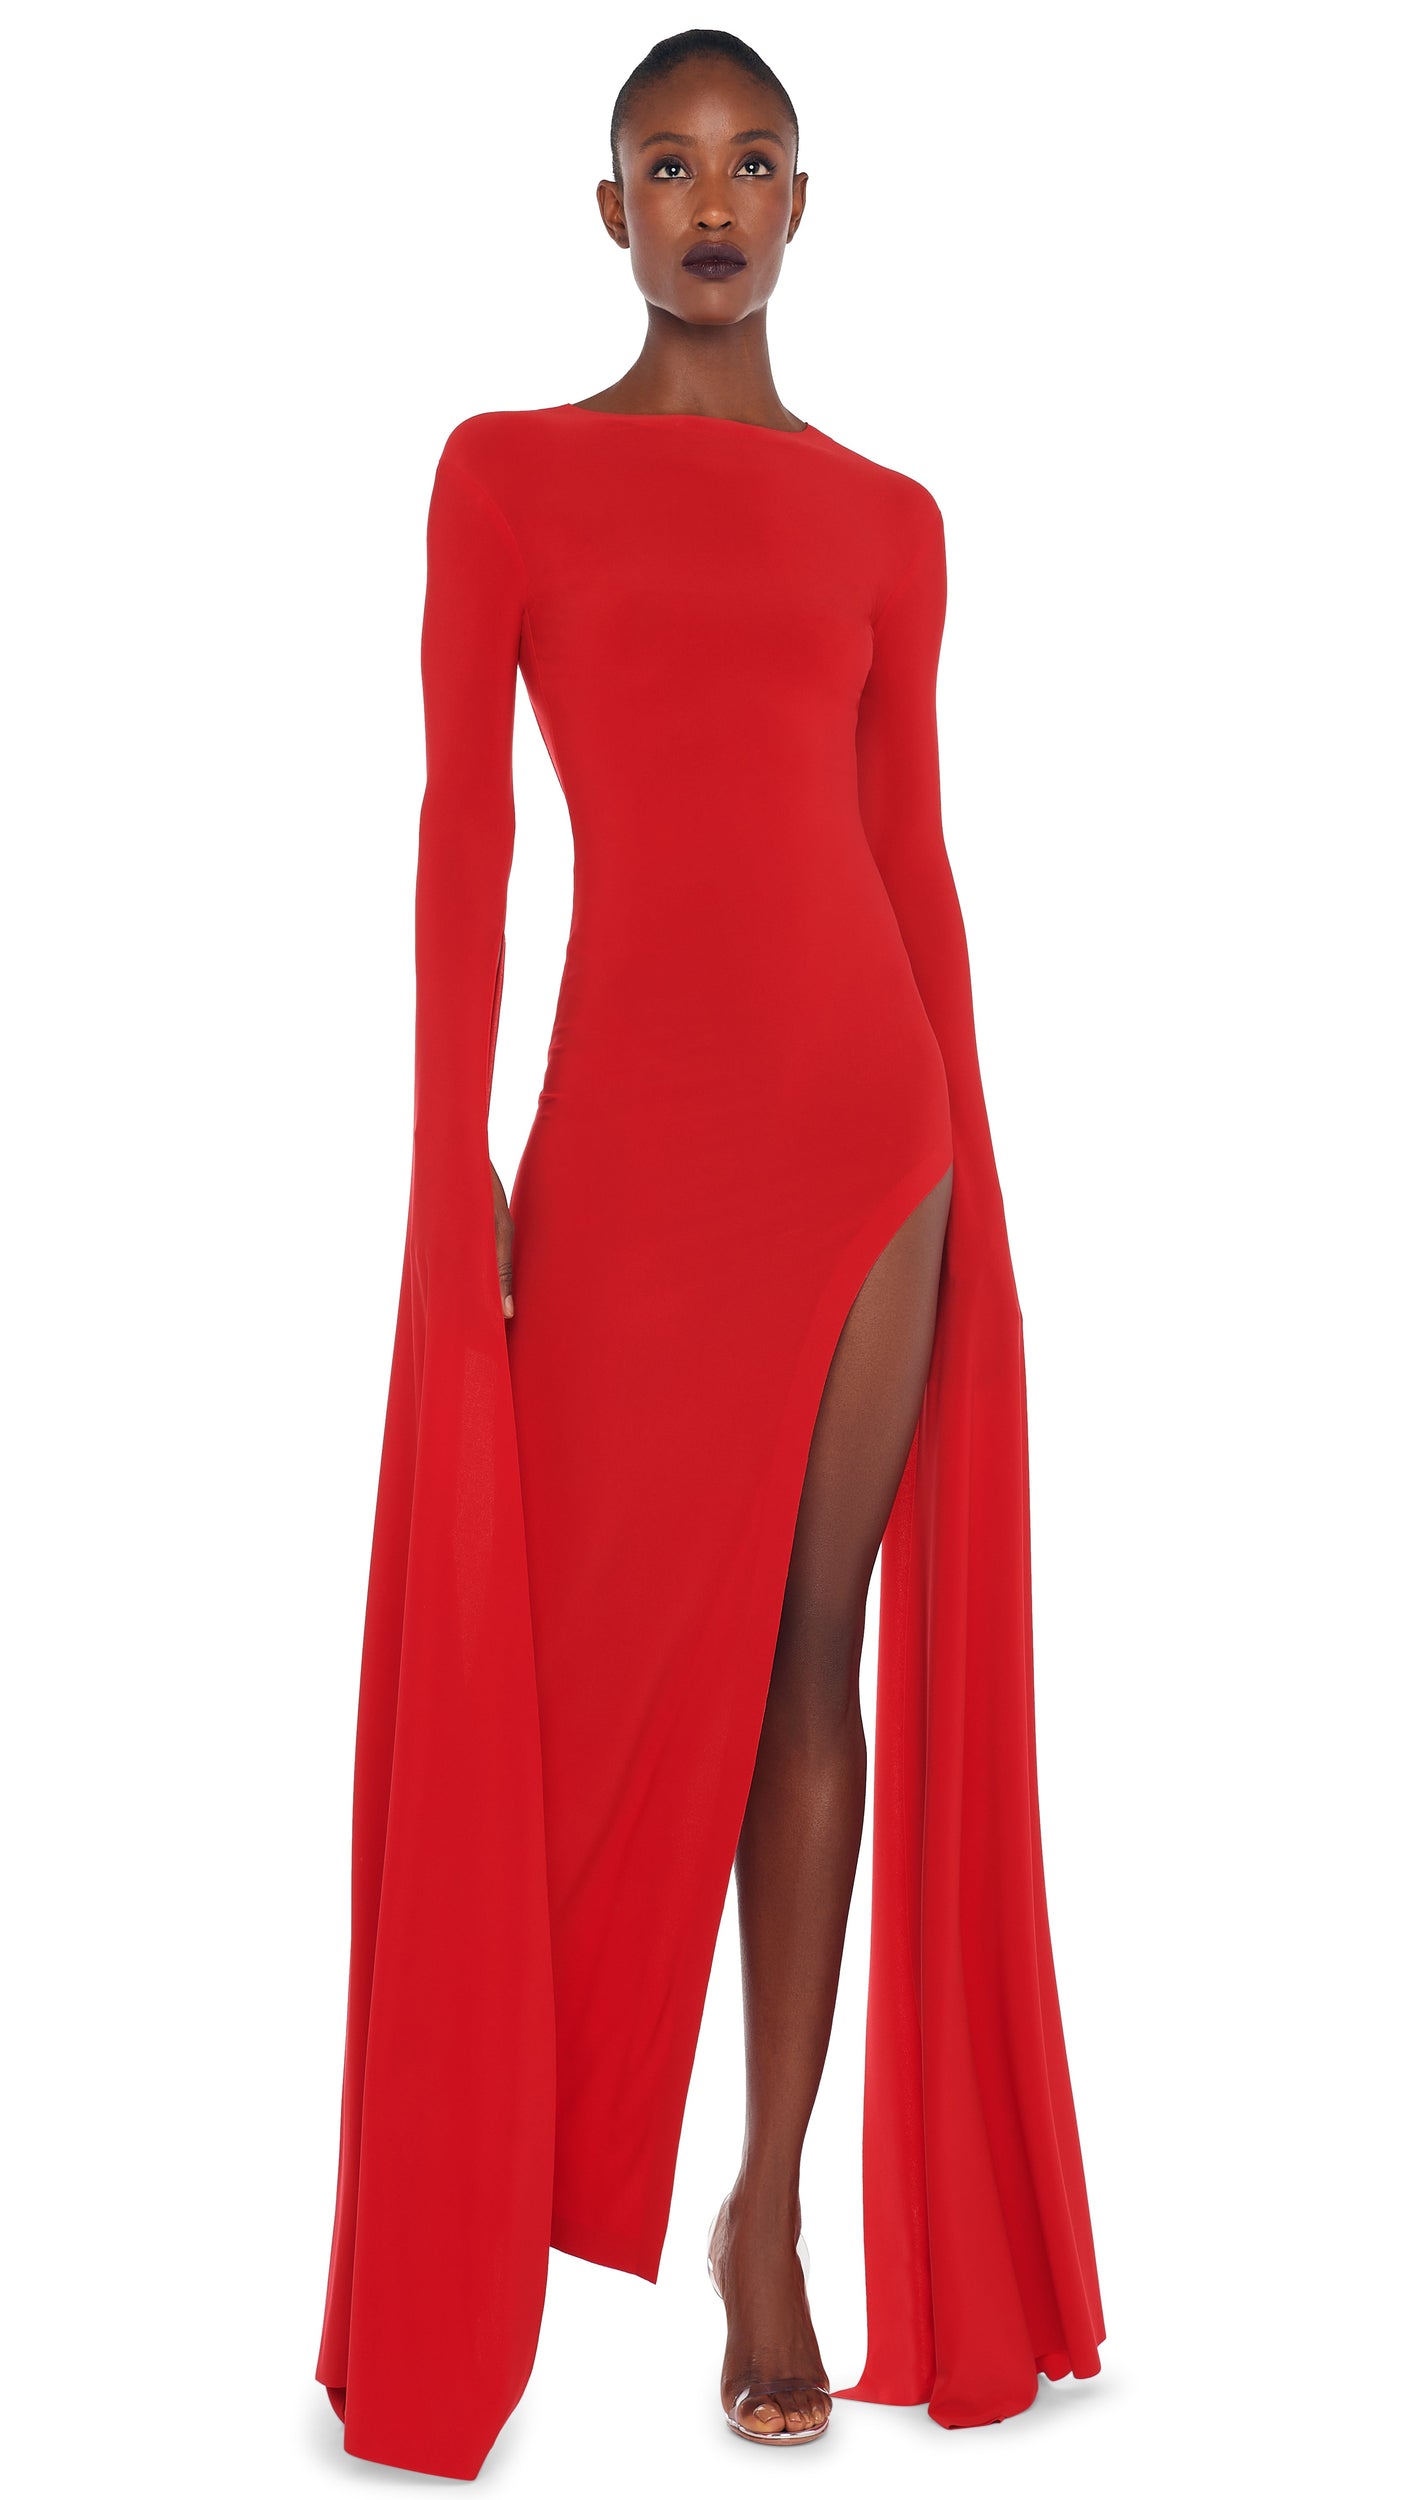 Classy Long Evening Dress in Red with Cape – Miss Mirelle Dress Shop